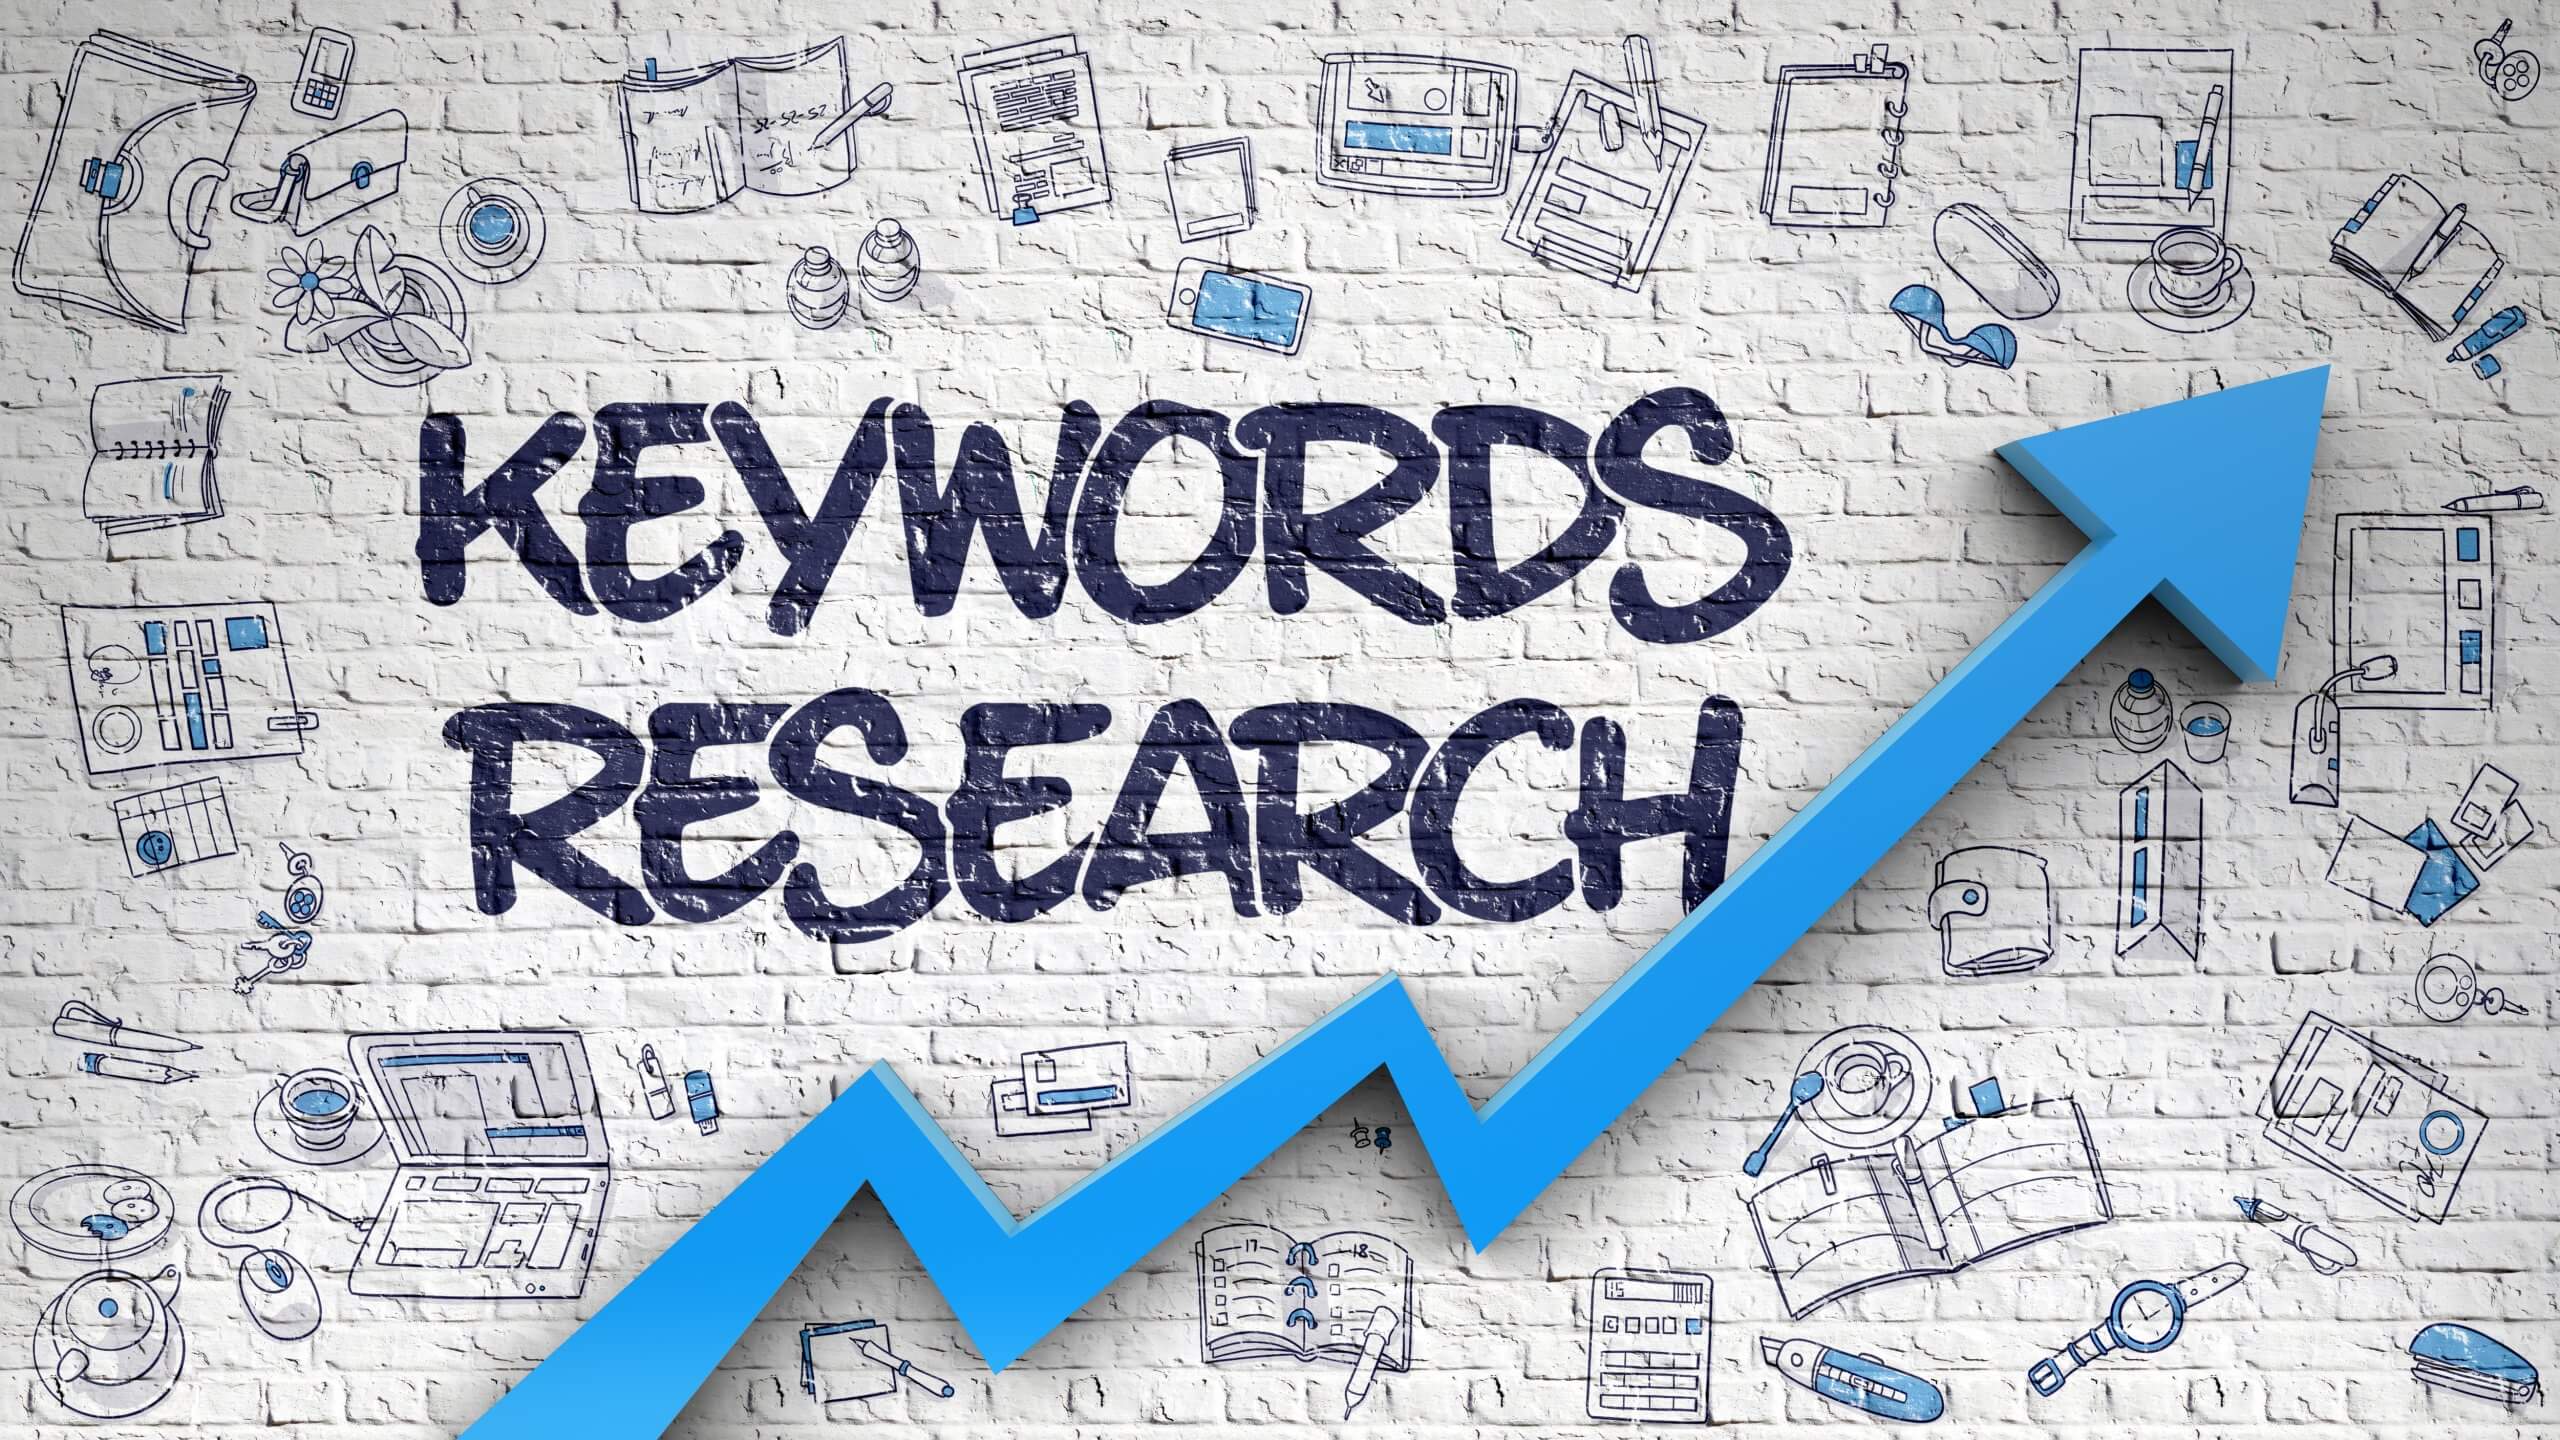 “Keywords Research” written in block letters against a white background with multiple sketches all around it. A bold, blue-colored arrow points upwards.